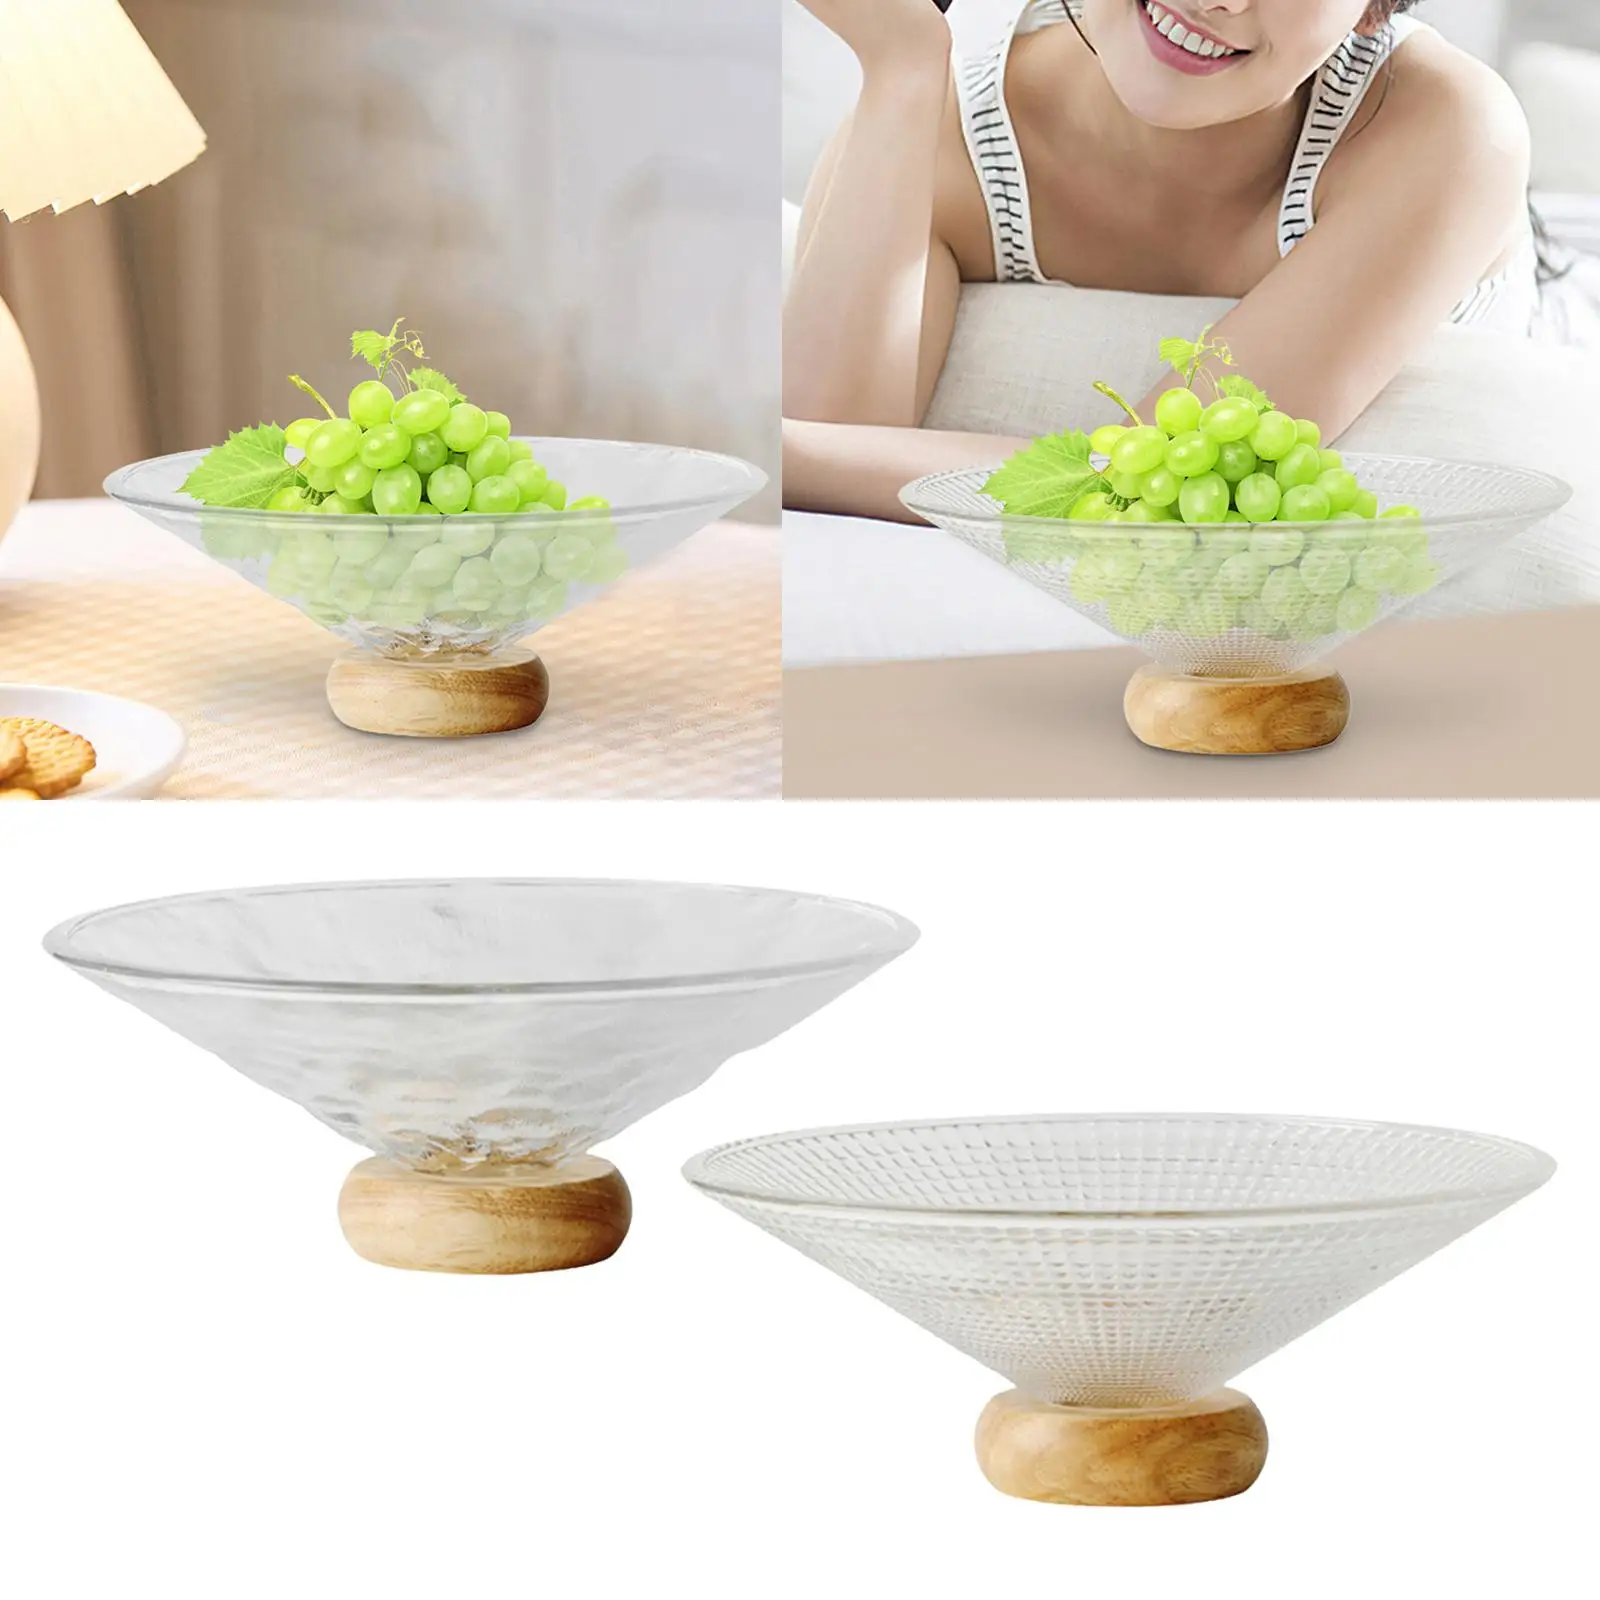 Decorative Pedestal Bowl Household Glass Fruit Tray High Foot Dining Room Tables Serving Fruit Tray Dessert Serving Bowl Tray